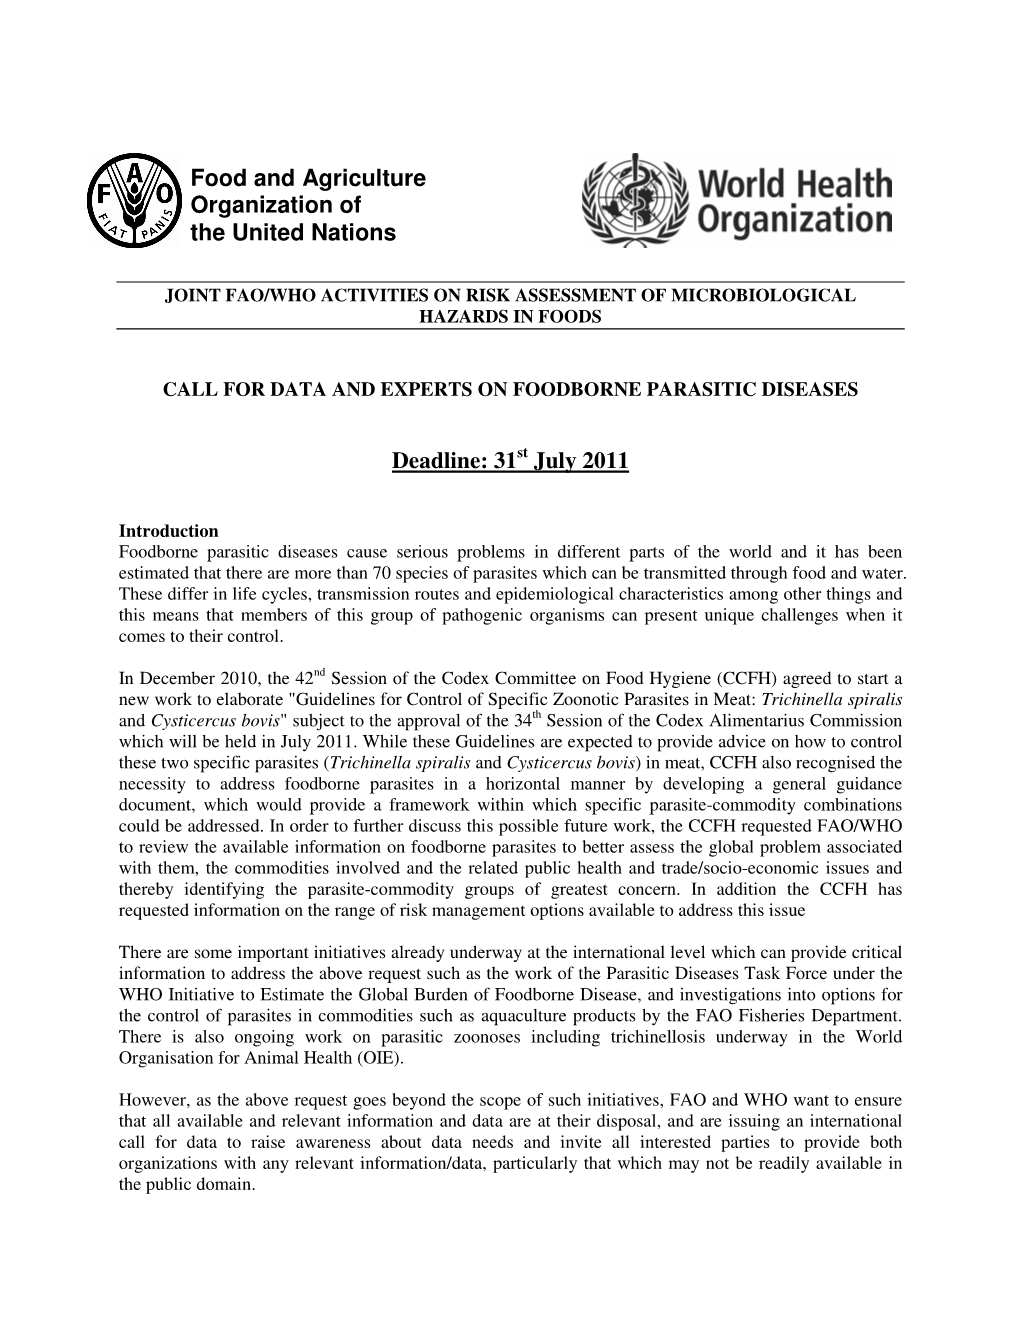 Call for Data and Experts on Foodborne Parasitic Diseases